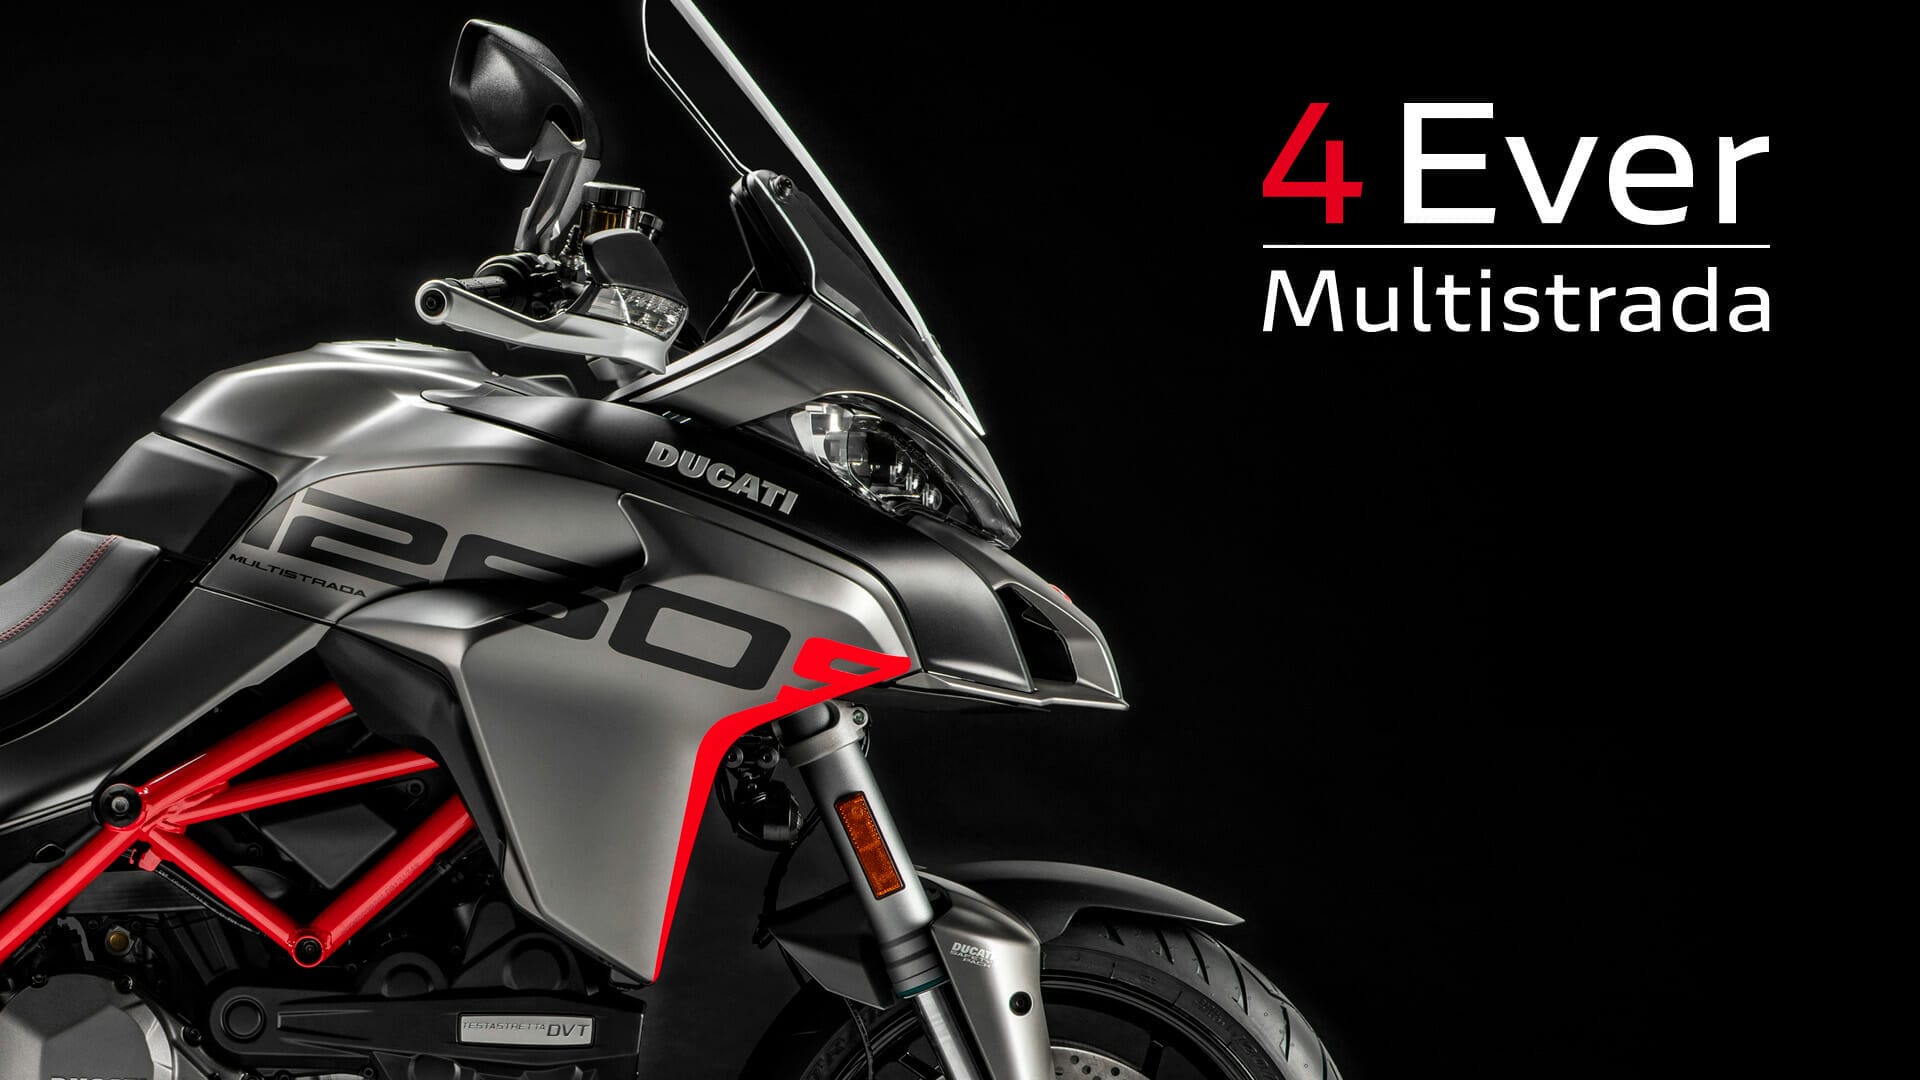 Four year #warranty for the #Multistrada family
- also in the app Motorcycle News